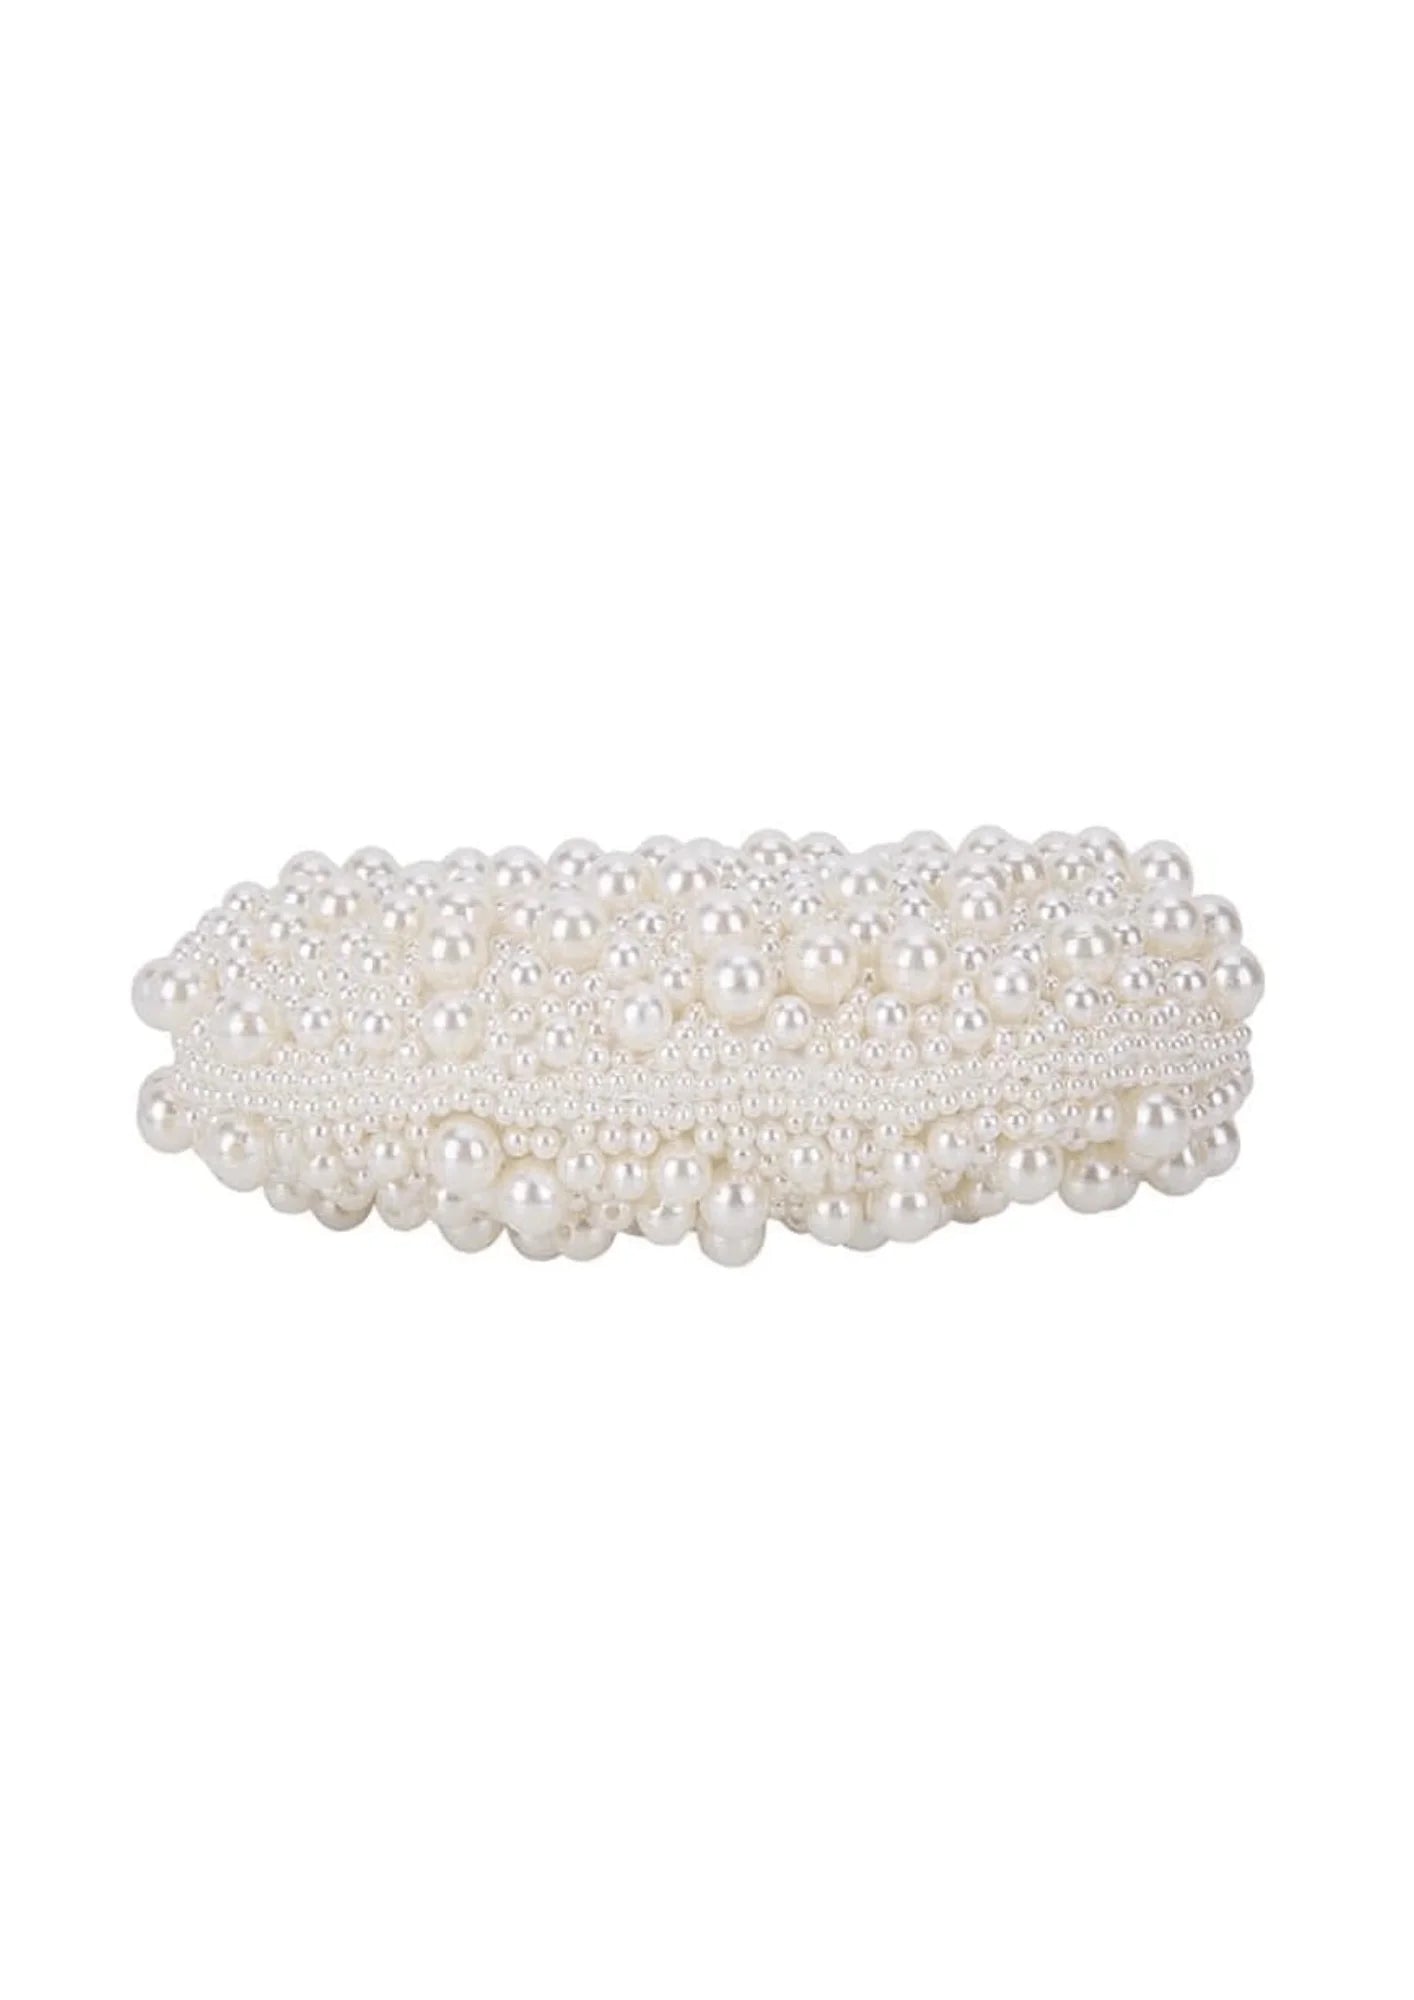 OFF WHITE BEADED CLUTCH